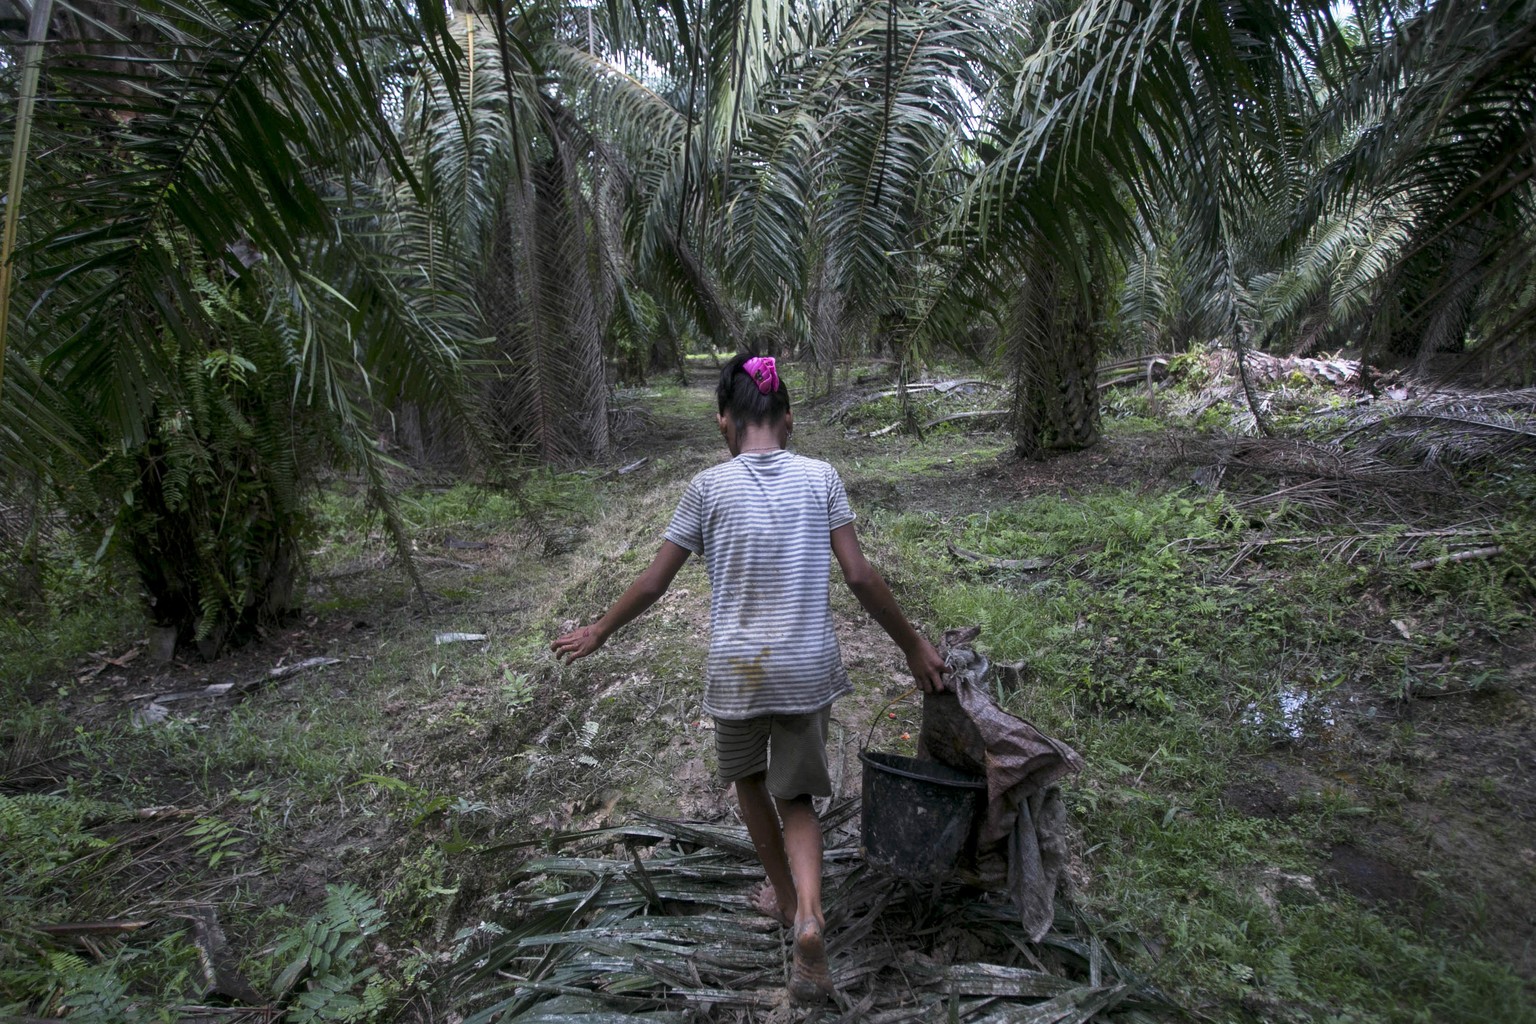 A child carries palm kernels collected from the ground at a palm oil plantation in Sumatra, Indonesia, Monday, Nov. 13, 2017. (AP Photo/Binsar Bakkara)